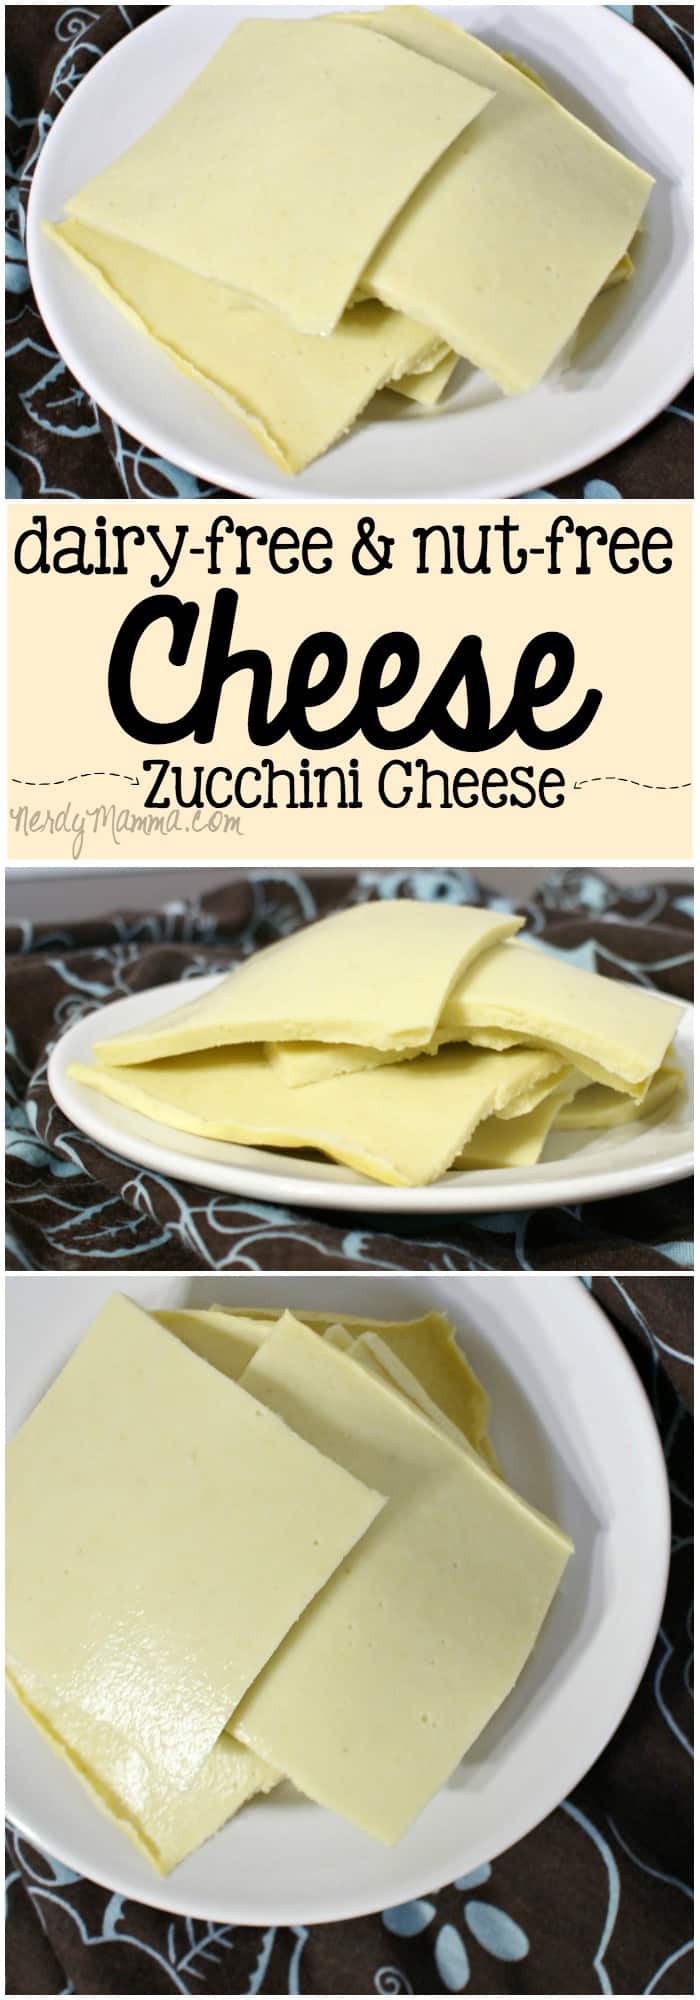 This dairy-free and nut-free cheese recipe is so yummy. It doesn't even taste like zucchini--it tastes like Cheese. LOL!